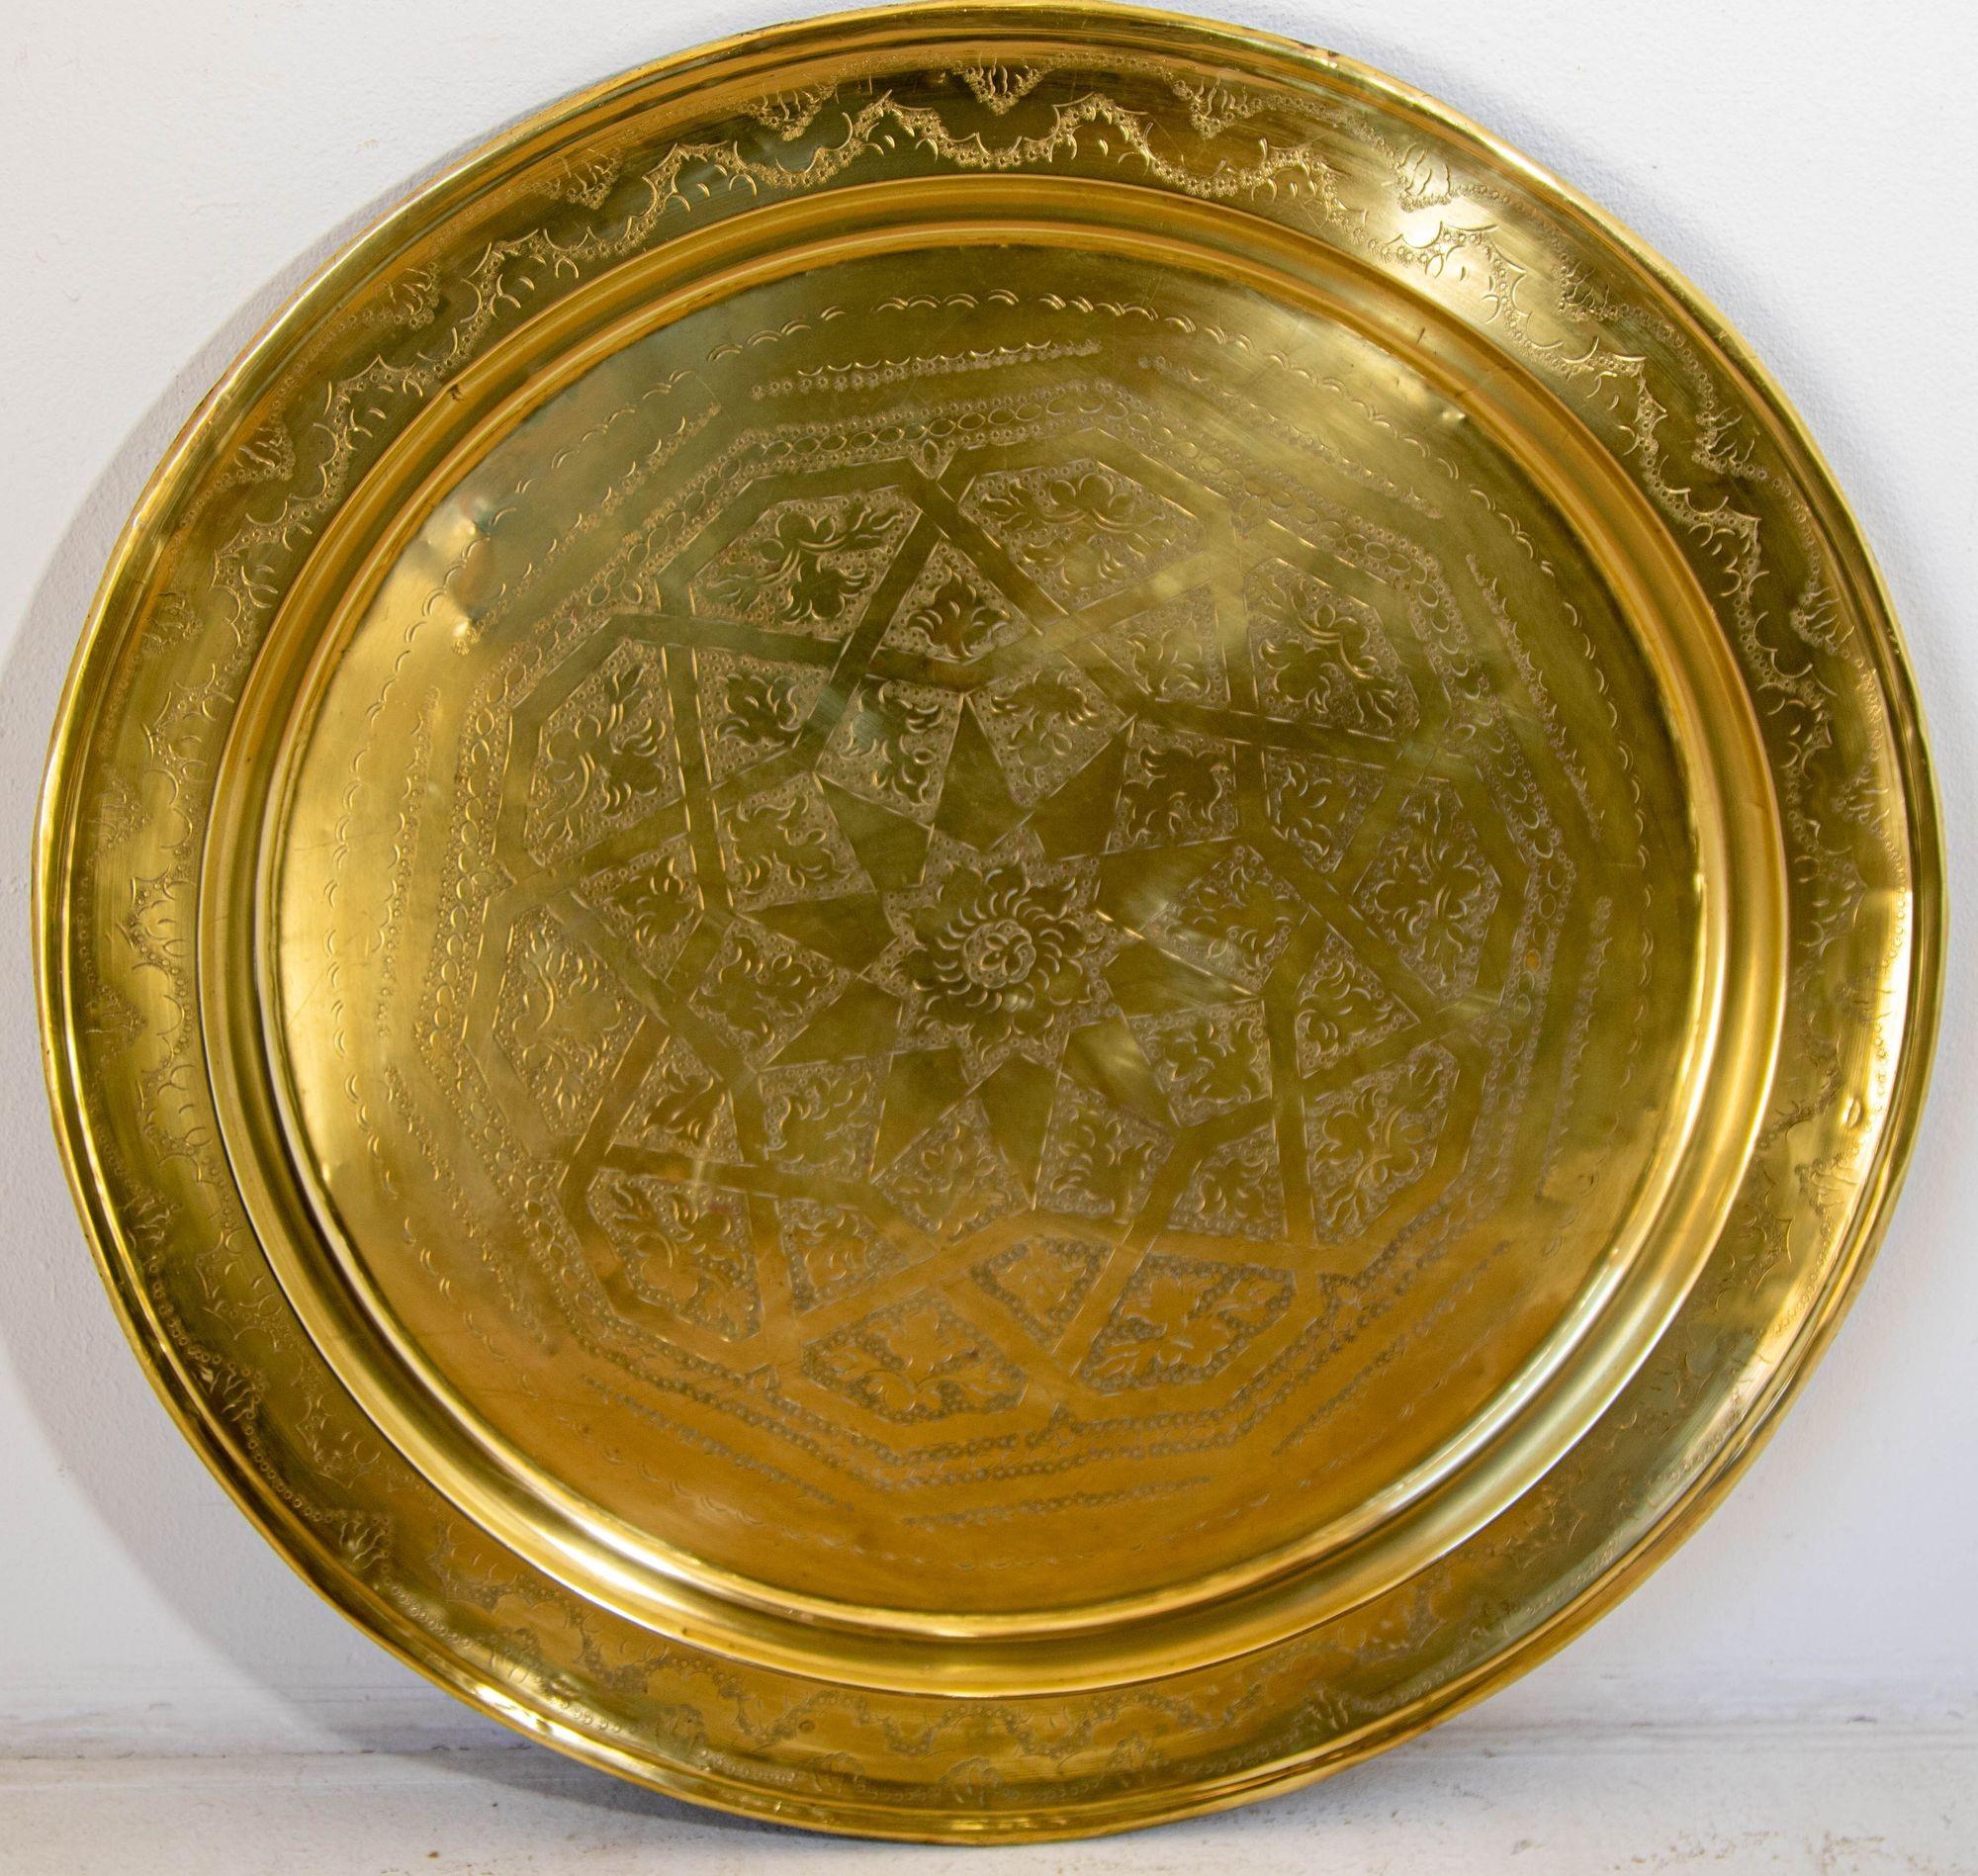 1940's Antique Moroccan Large Polished Round Brass Tray Platter 30 in. D.
Antique Moroccan large metal polished round brass tray platter.
Polished decorative metal brass round tray with very fine intricate designs.
Finely hand-hammered and chiseled